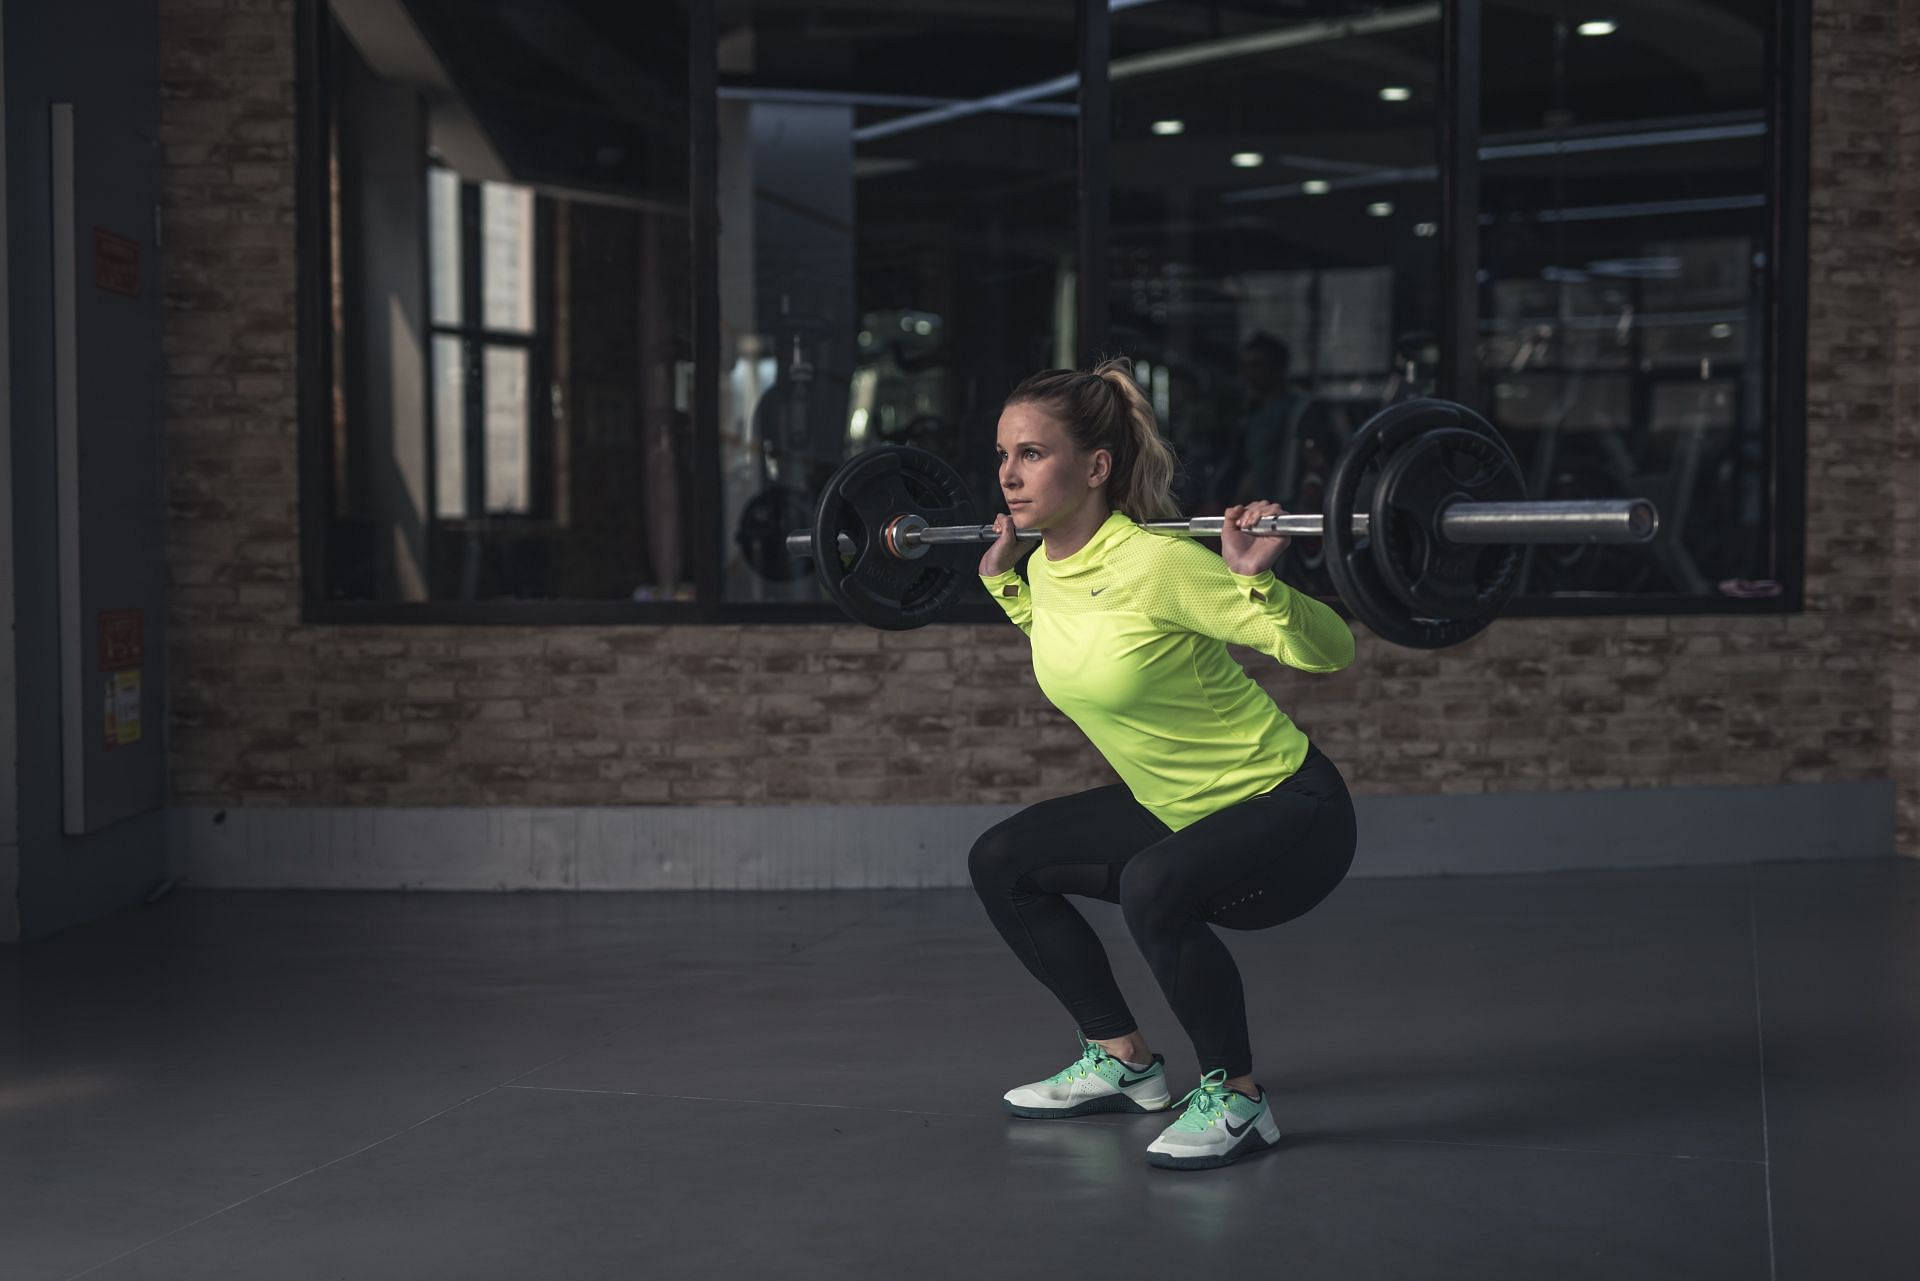 Squats are one of the best strength training exercises that require good glute strength (Image via Pexels/Li Sun)